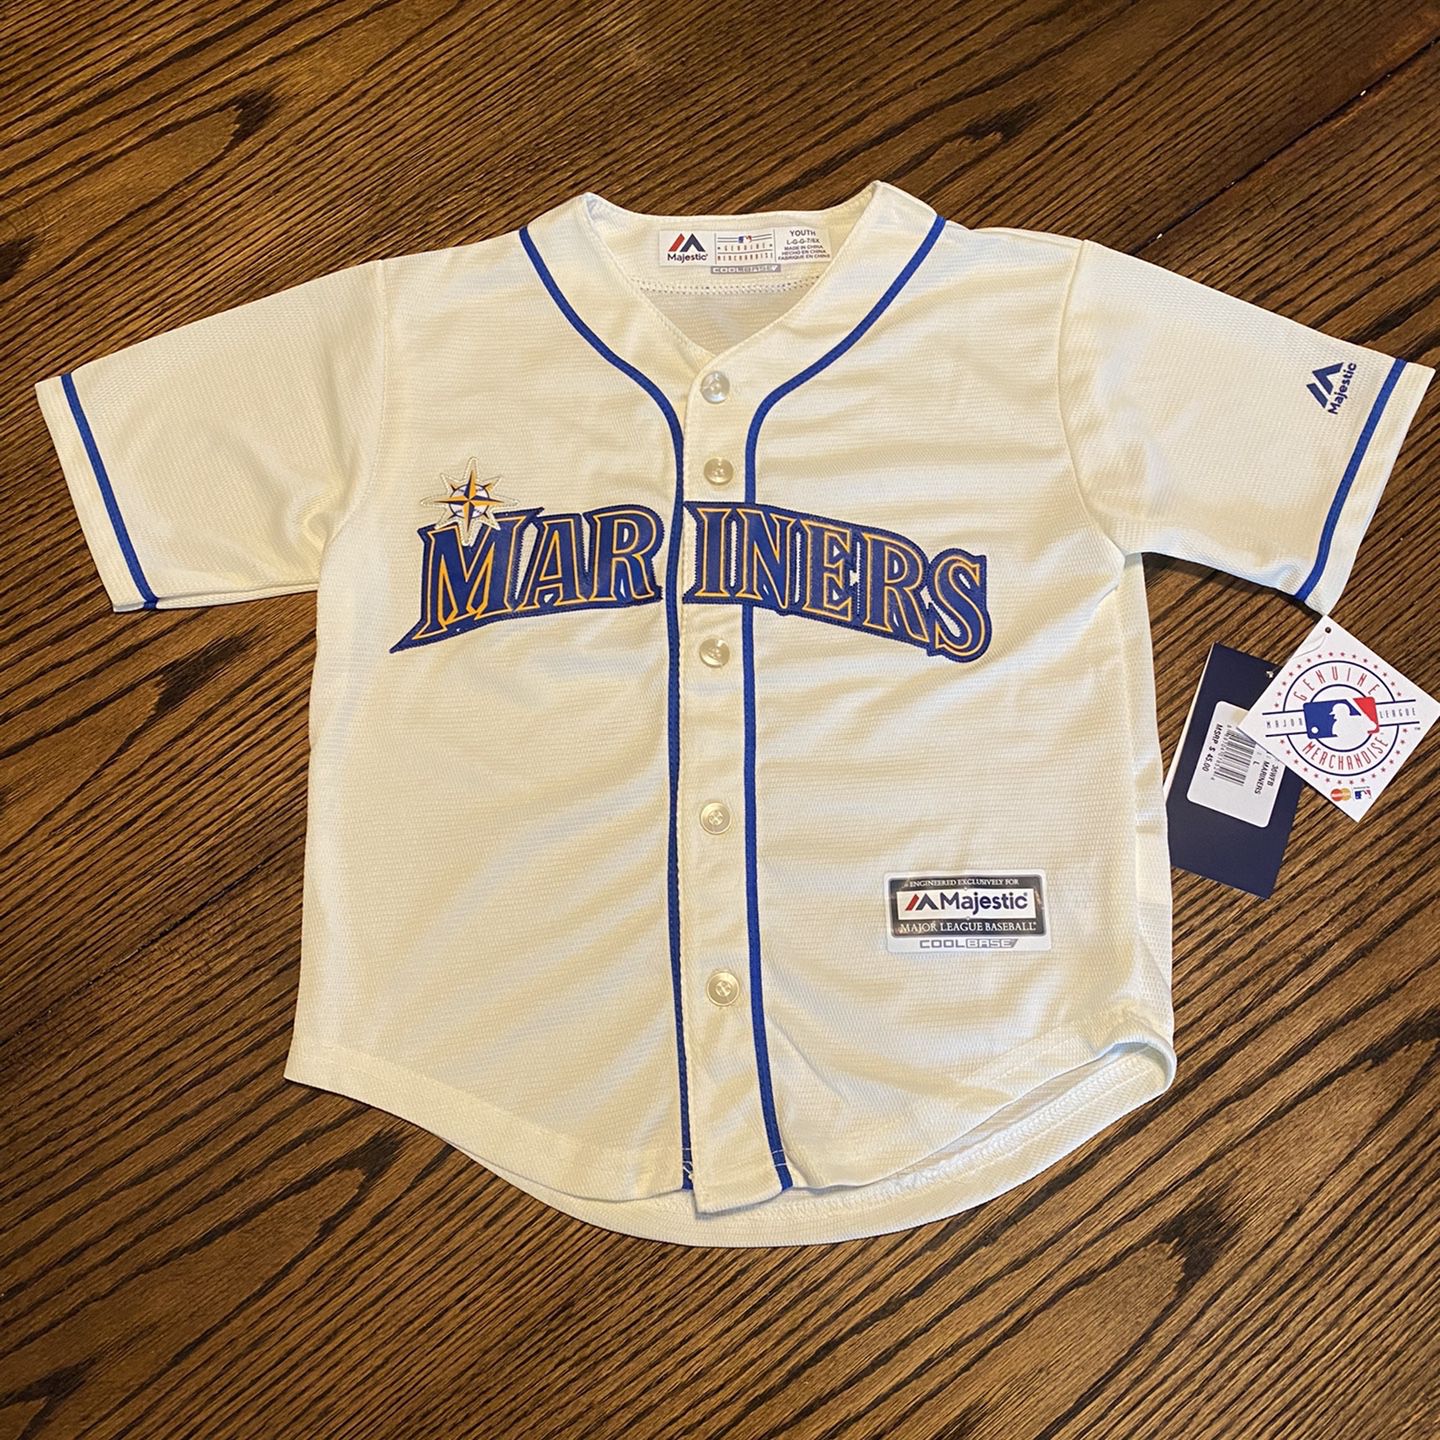 New! Youth Size 6/7 Mariners Jersey. Sunday Cream Color for Sale